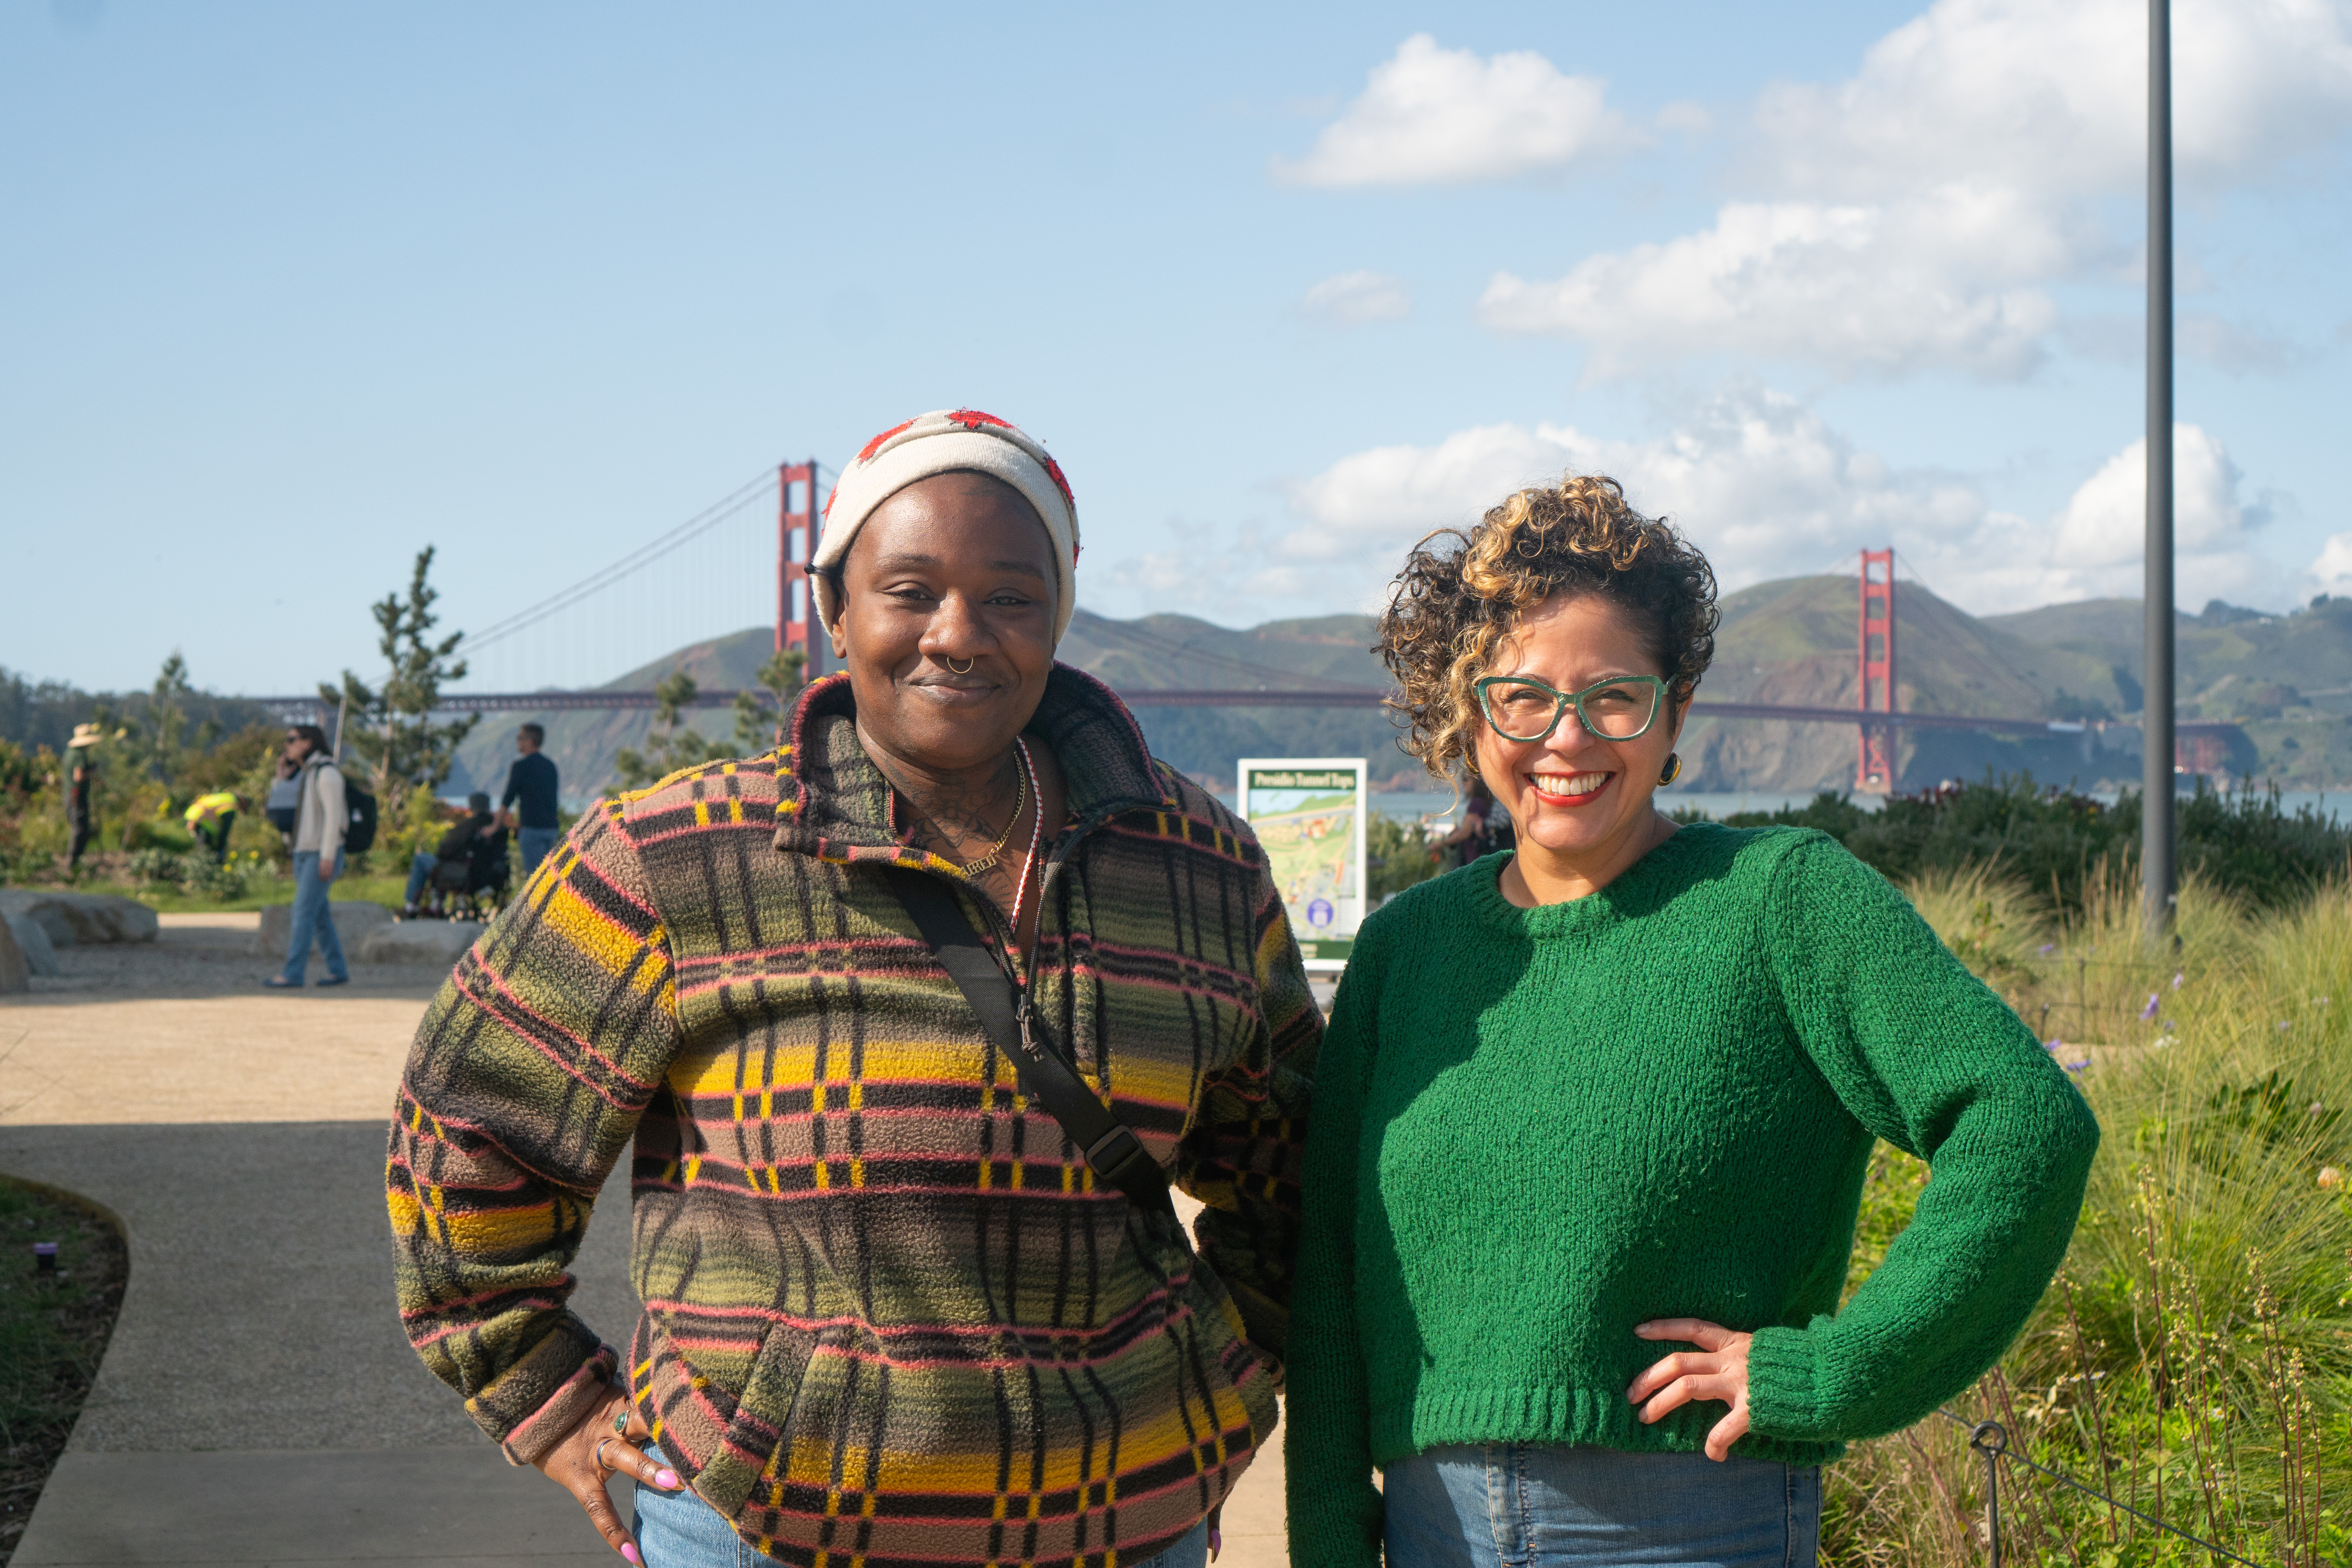 Two women, Tosha and Artist and Presidio Activator Favianna Rodriguez, standing and smiling on the Presidio Tunnel Tops with the Golden Gate Bridge in the background.